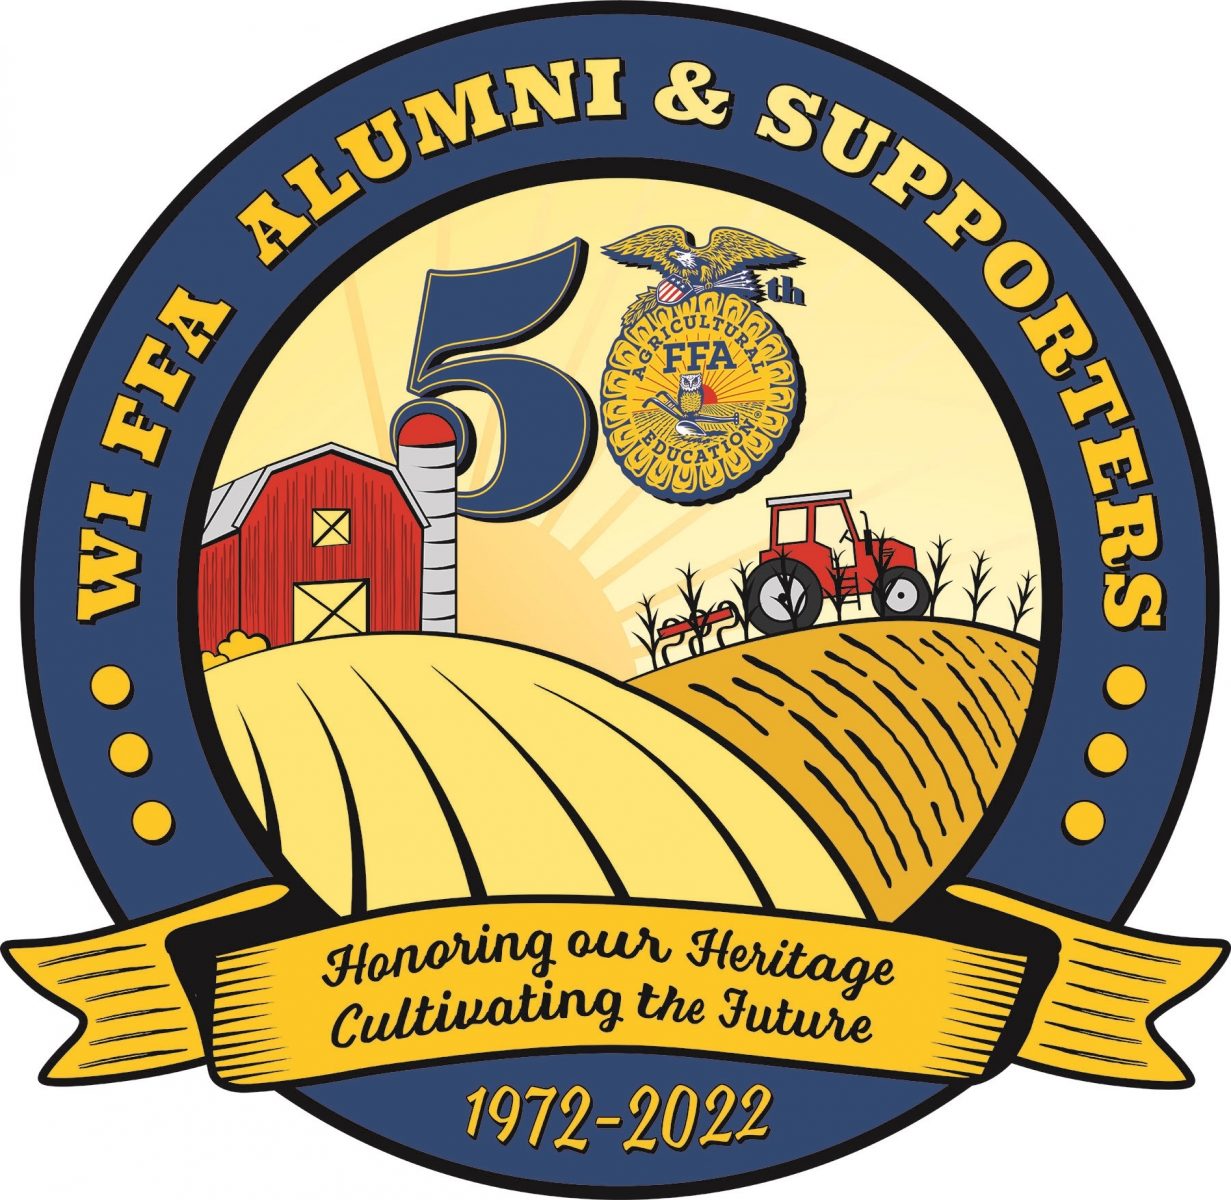 Wisconsin FFA Alumni & Supporters Association Convention and Annual Meeting held Feb. 4-5